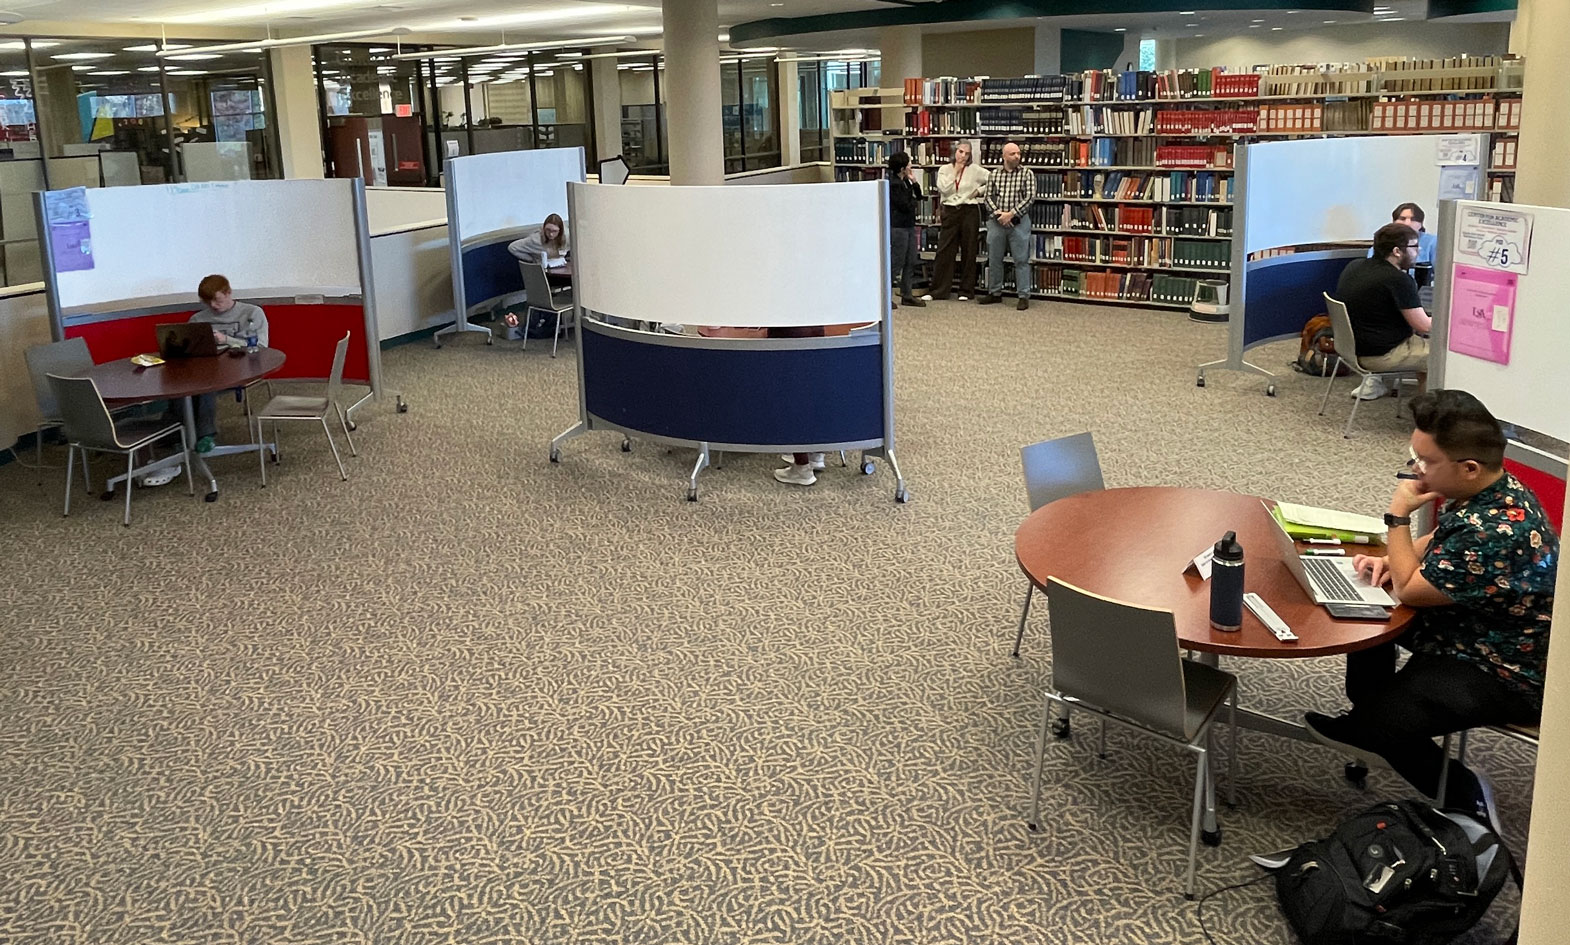 Student Success Center with mobile whiteboards on casters